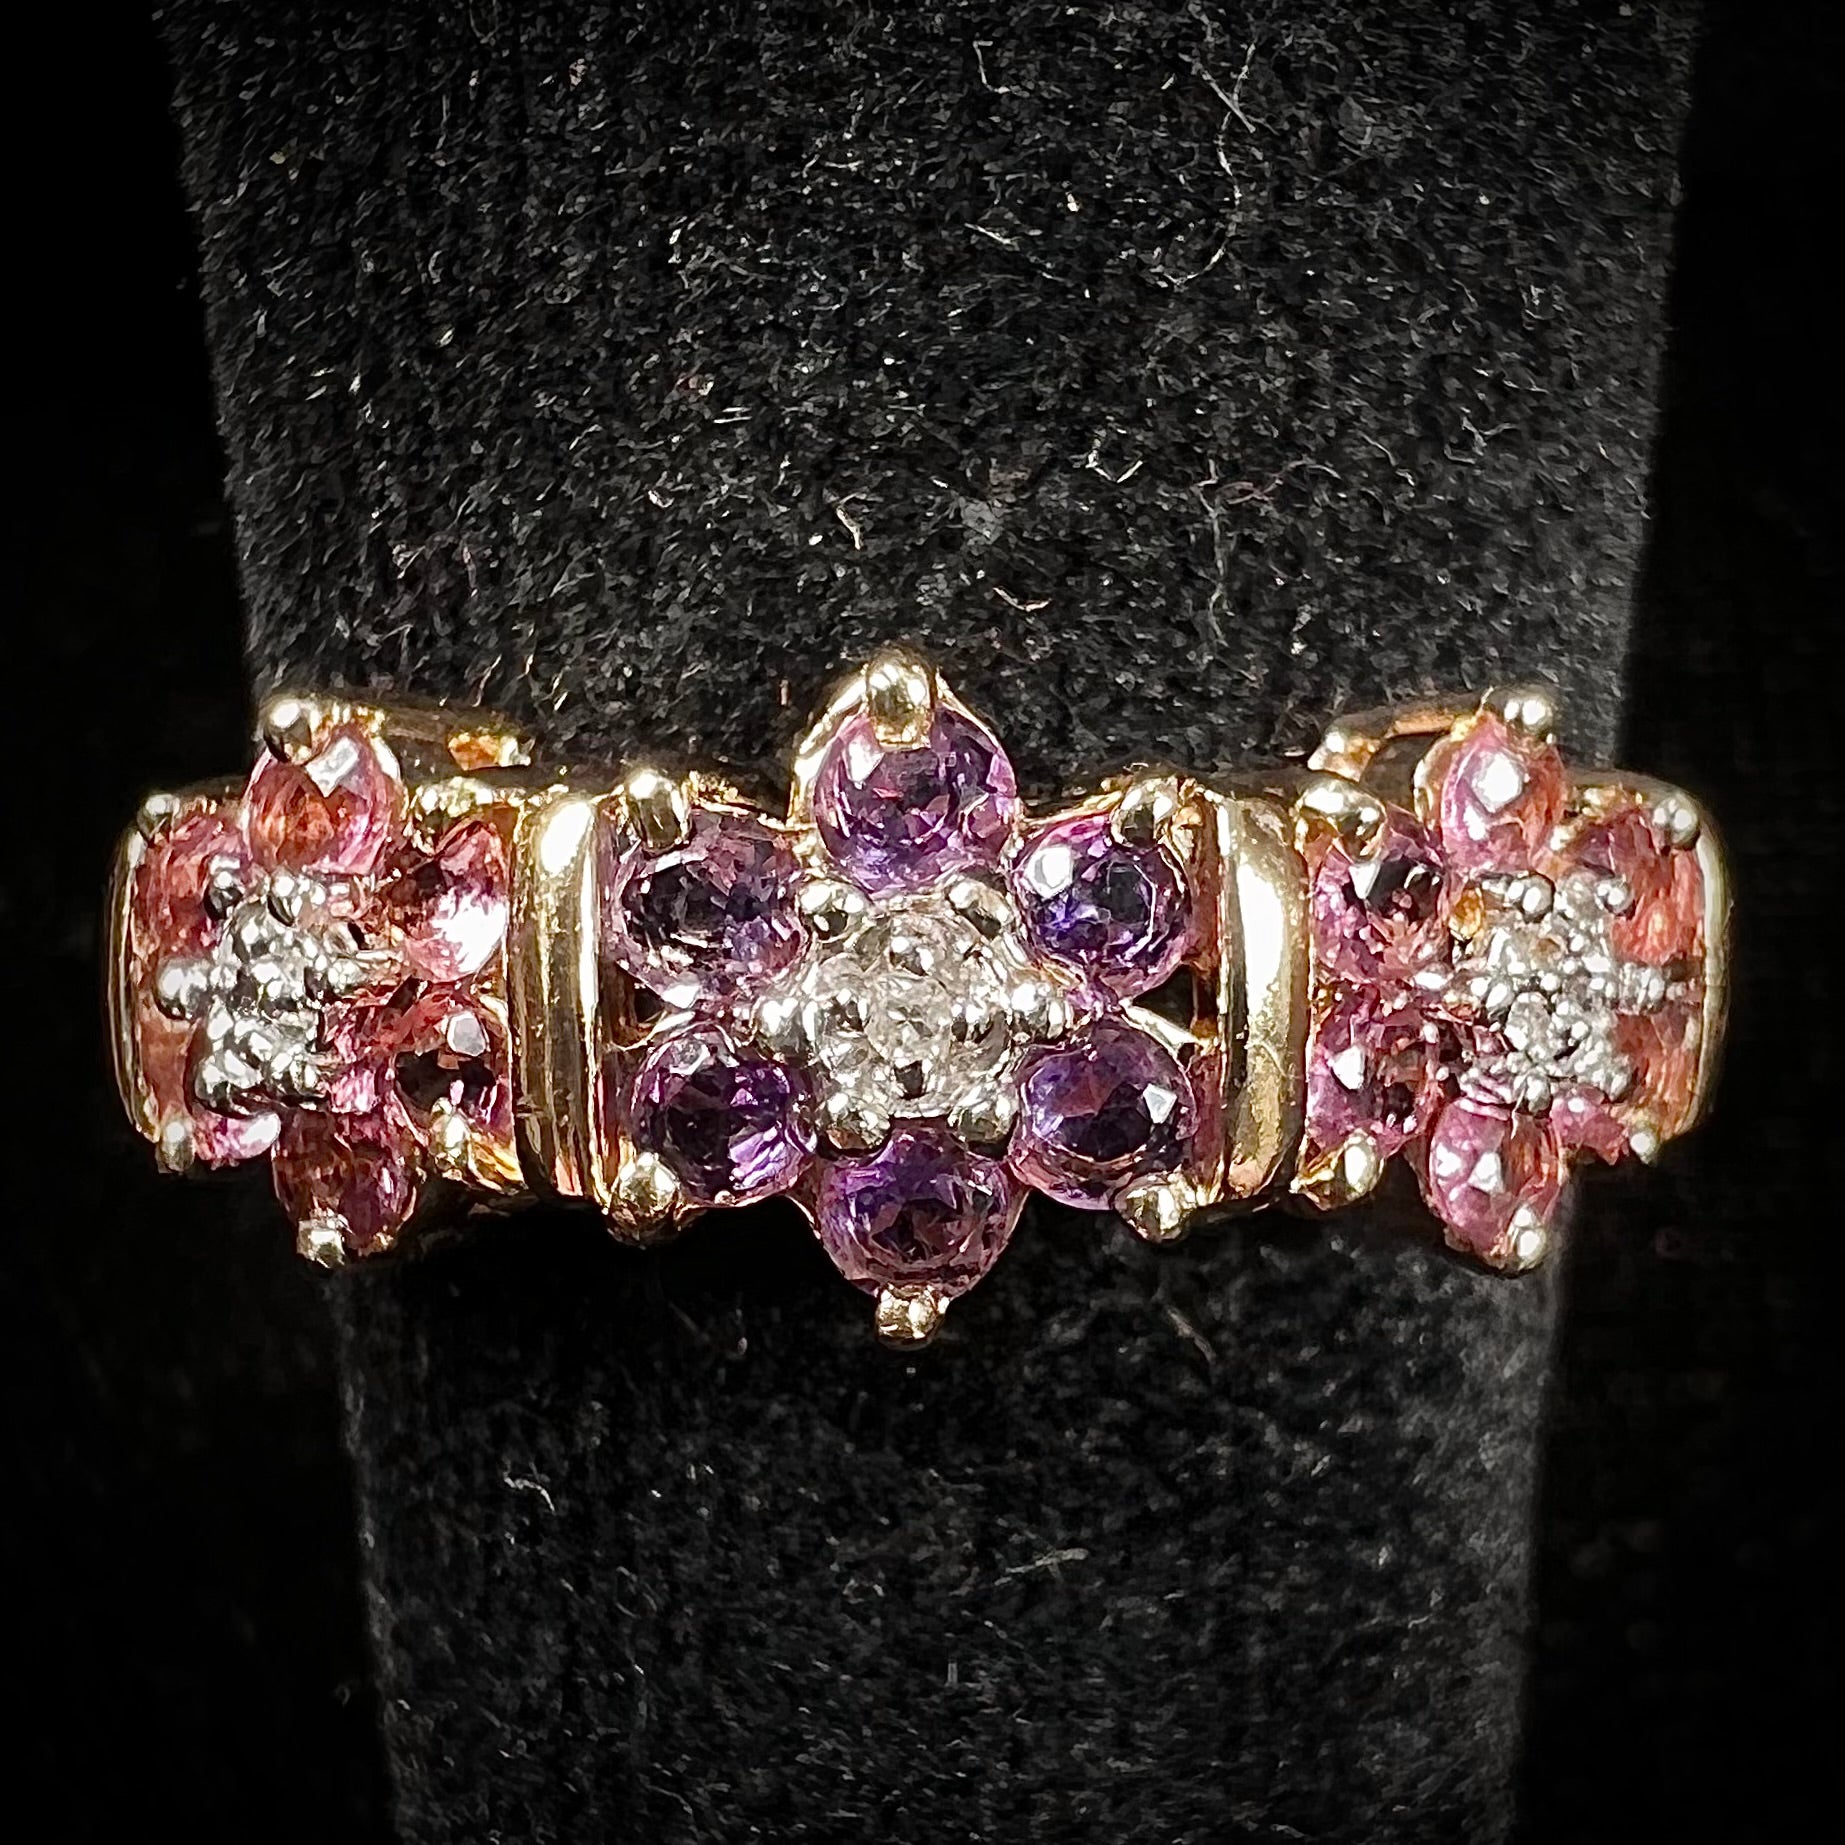 A vintage ladies' flower ring set with set with amethyst and pink tourmaline petals with a diamond center stone.